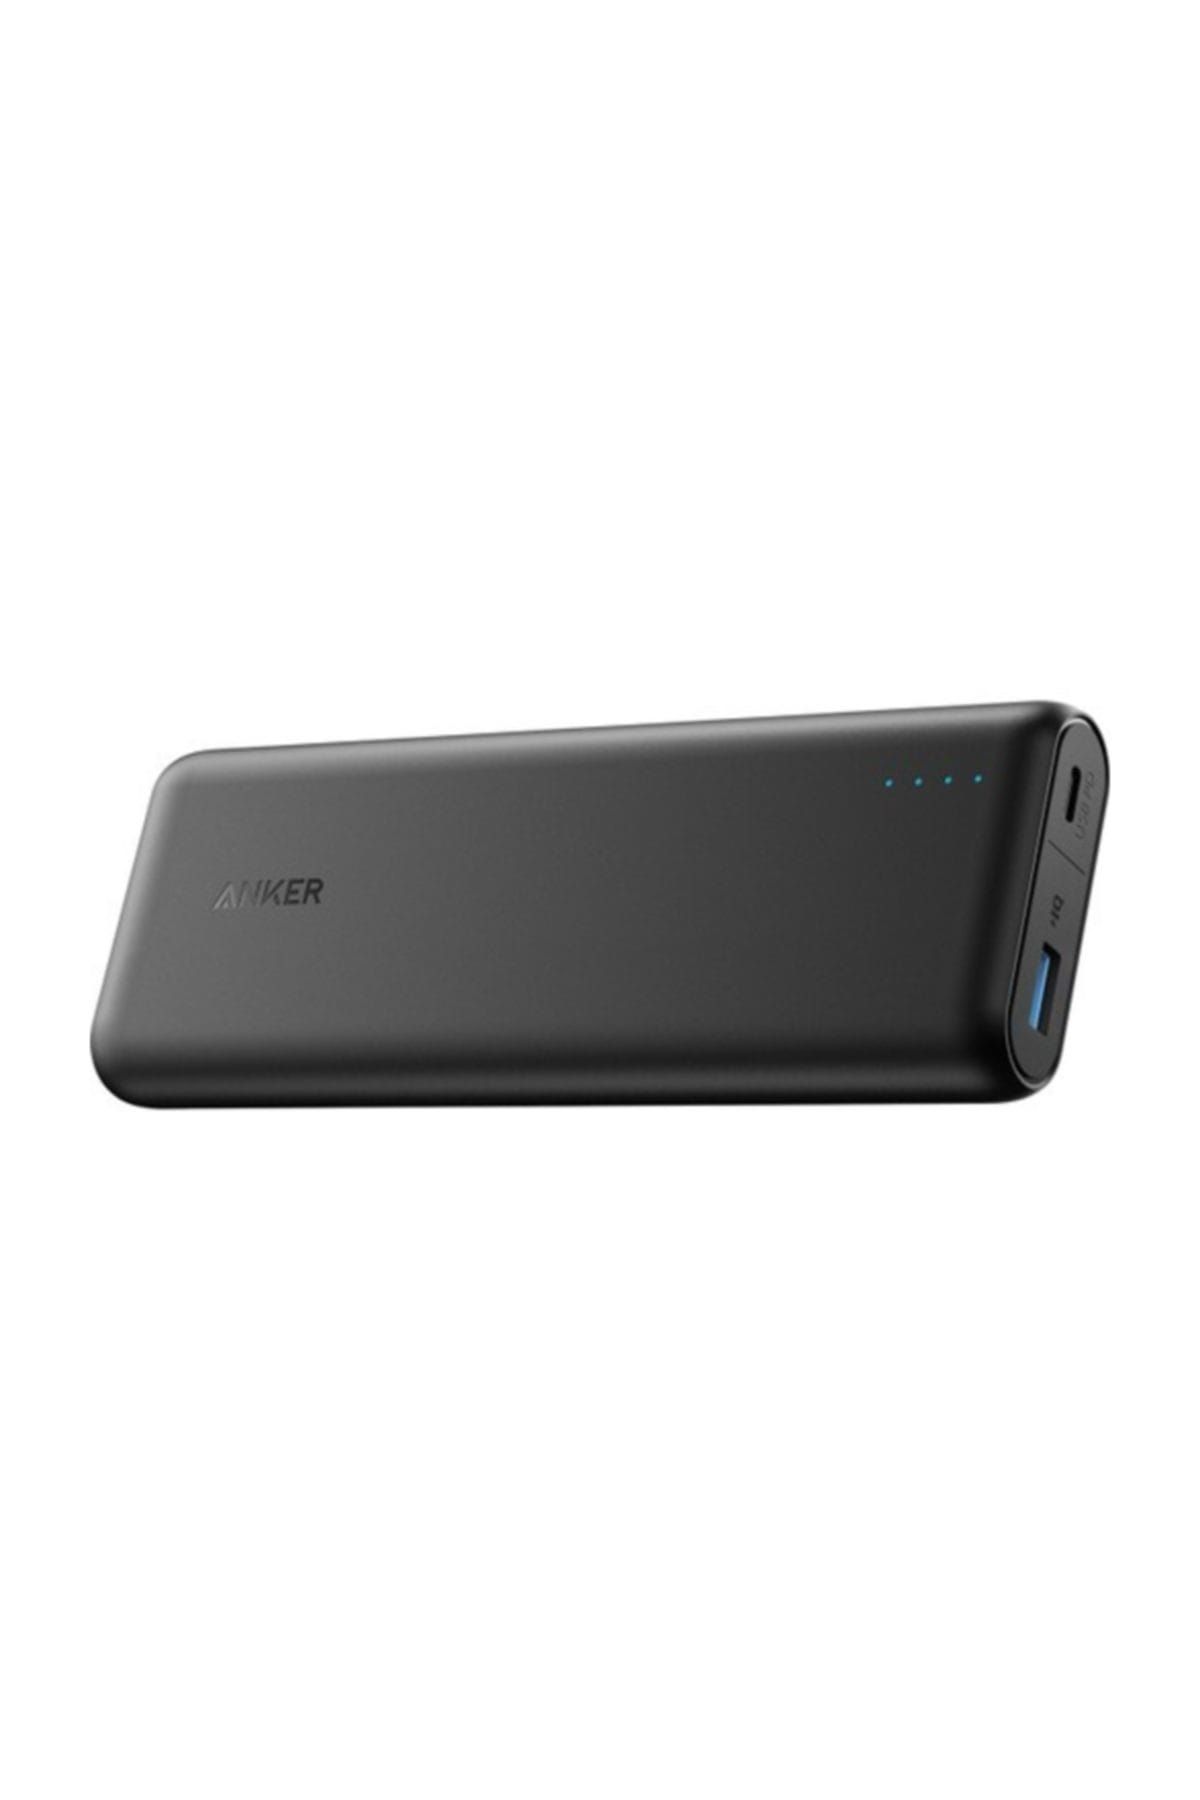 Anker PowerCore Speed 20000 mAh Power Delivery Powerbank